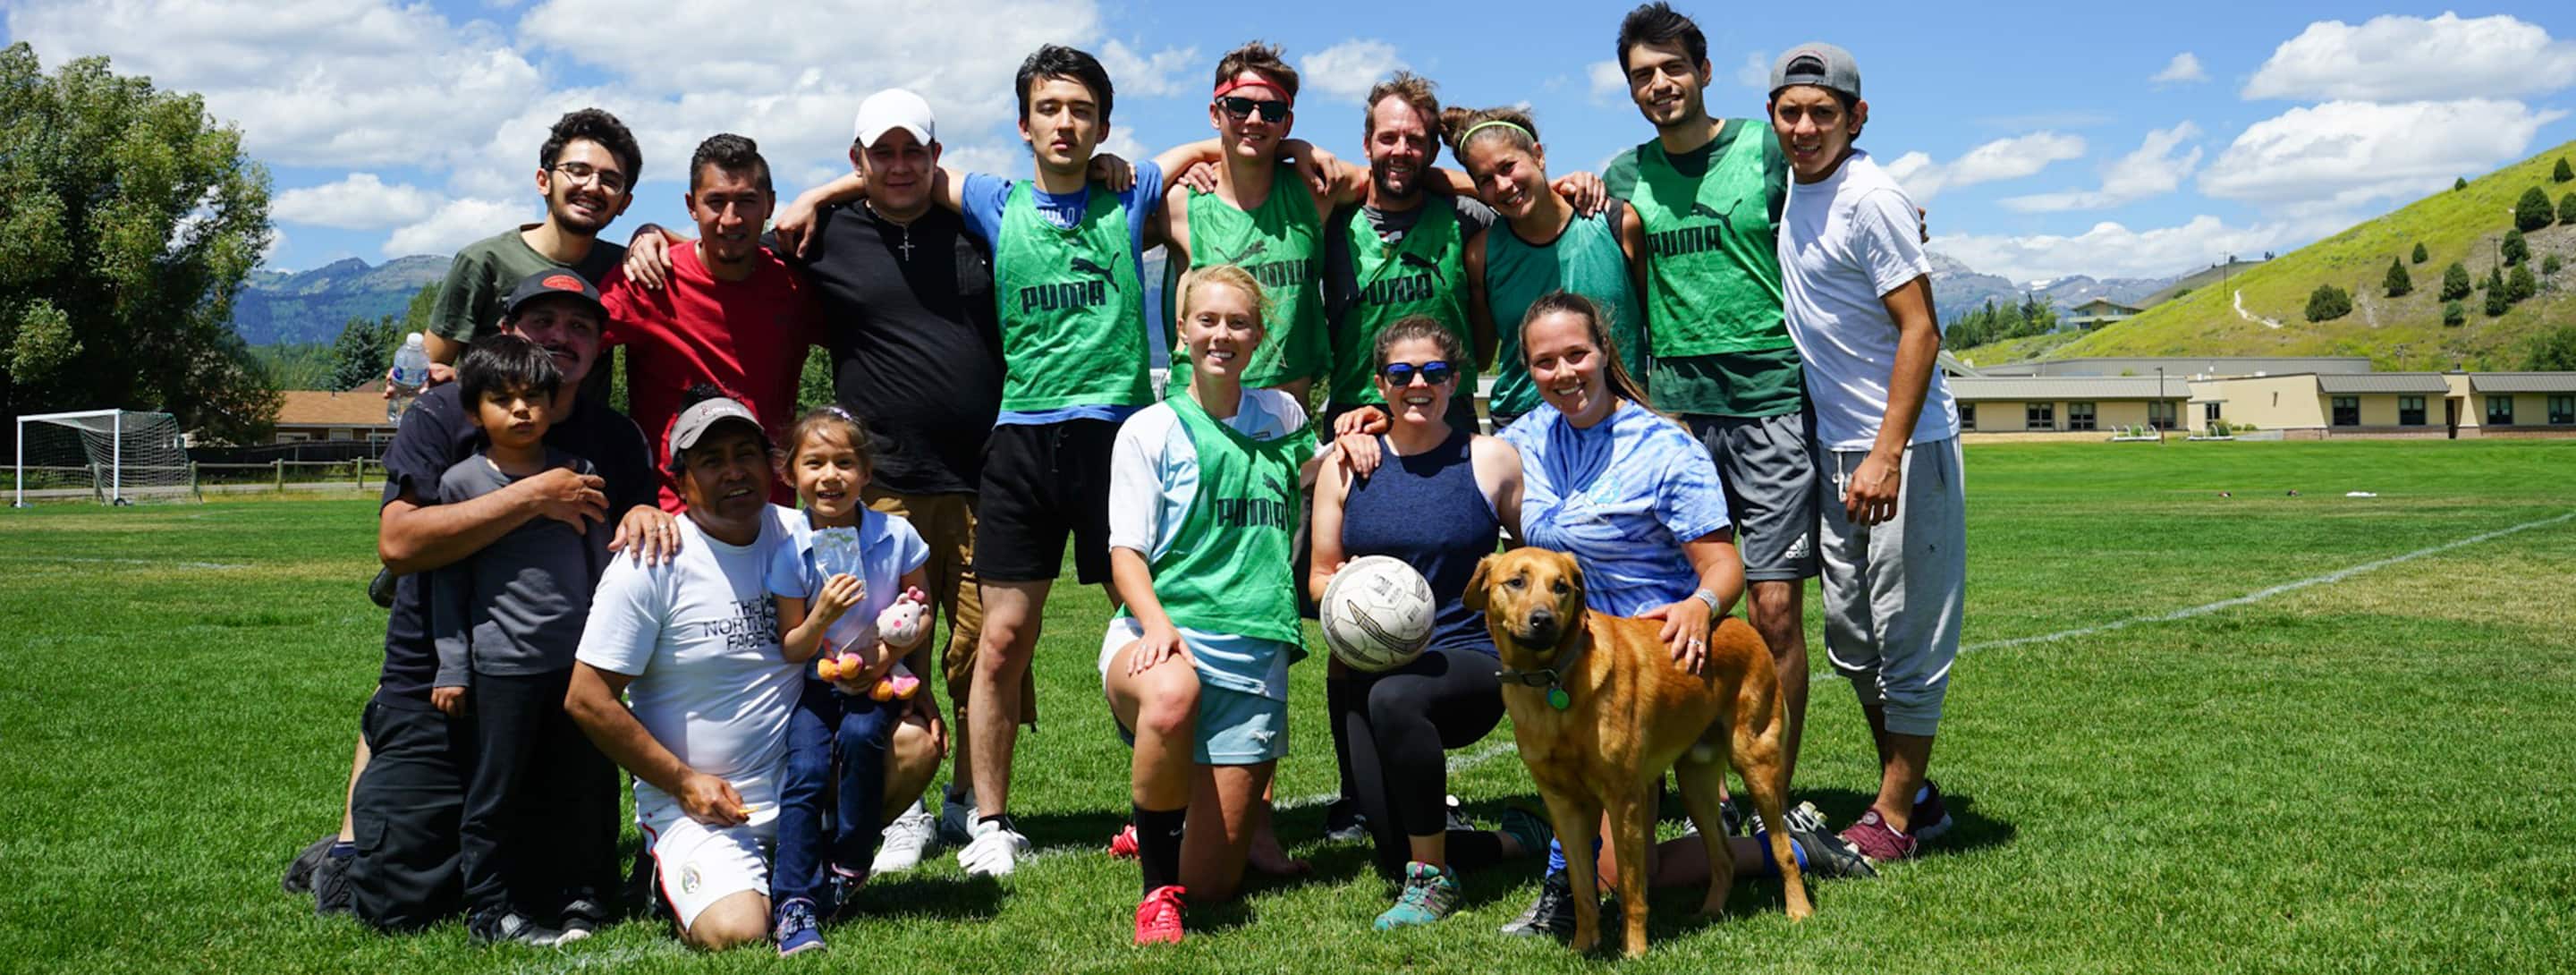 A soccer team sponsored by the Fine Dining Restaurant Group on a field in Jackson Hole, Wyoming.